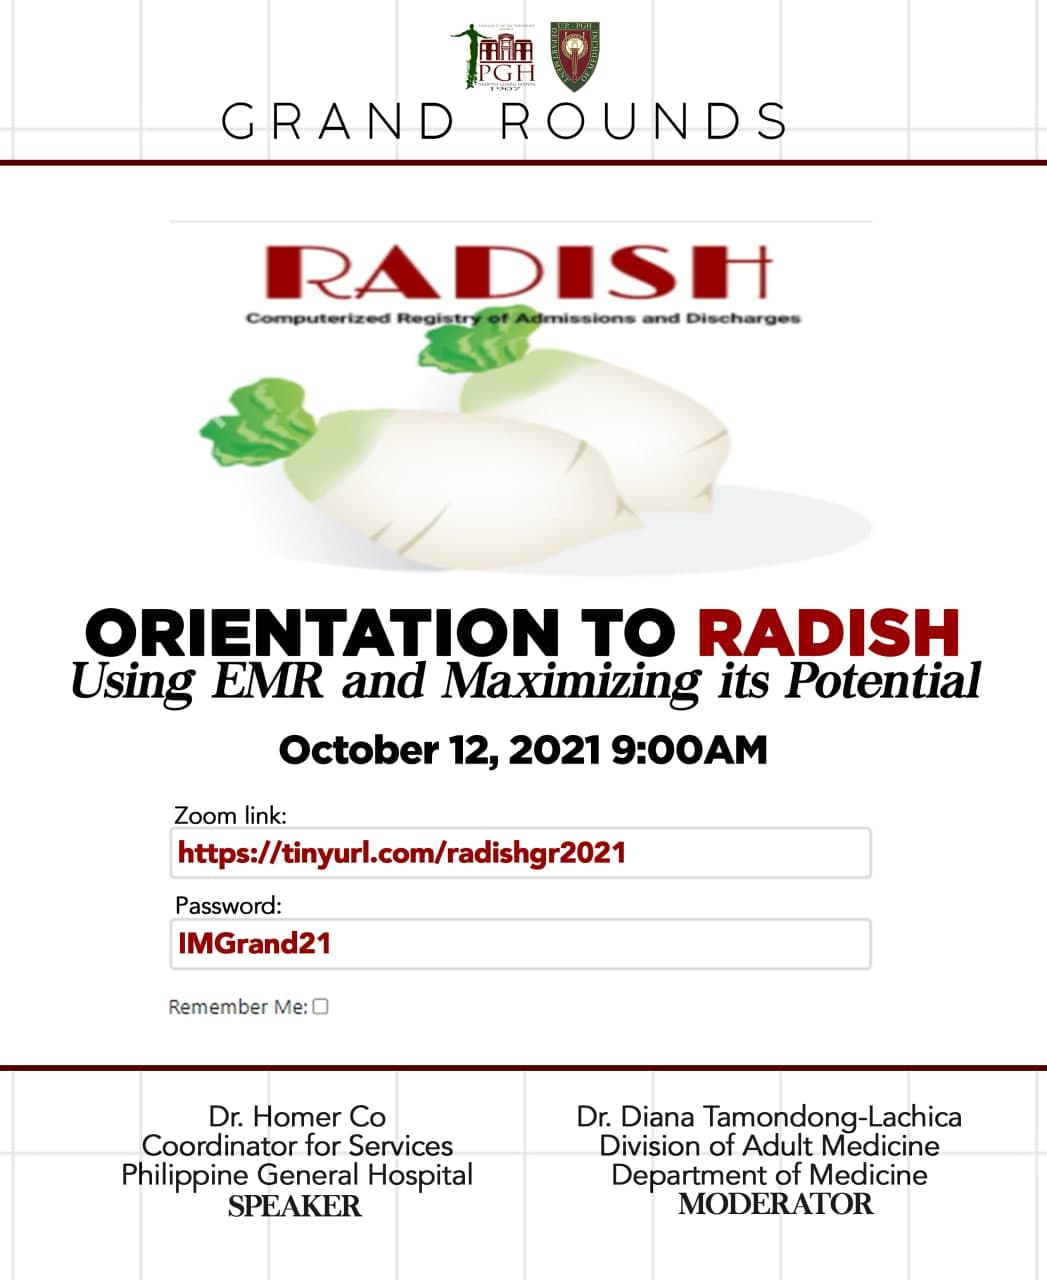 Upcoming: Grand Rounds October 12, 2021